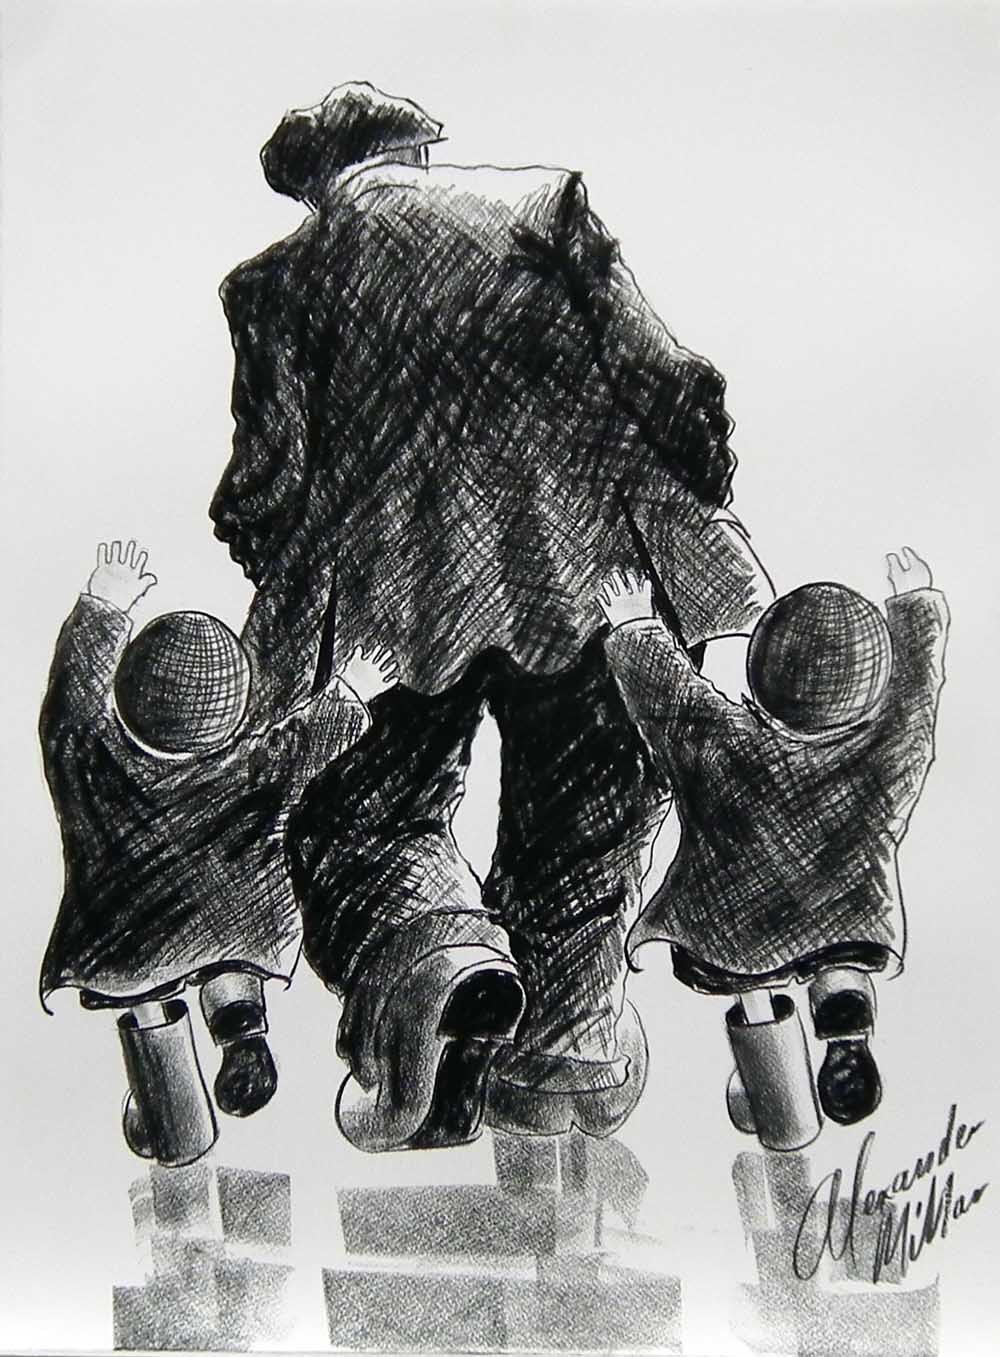 Just so excited by Alexander Millar